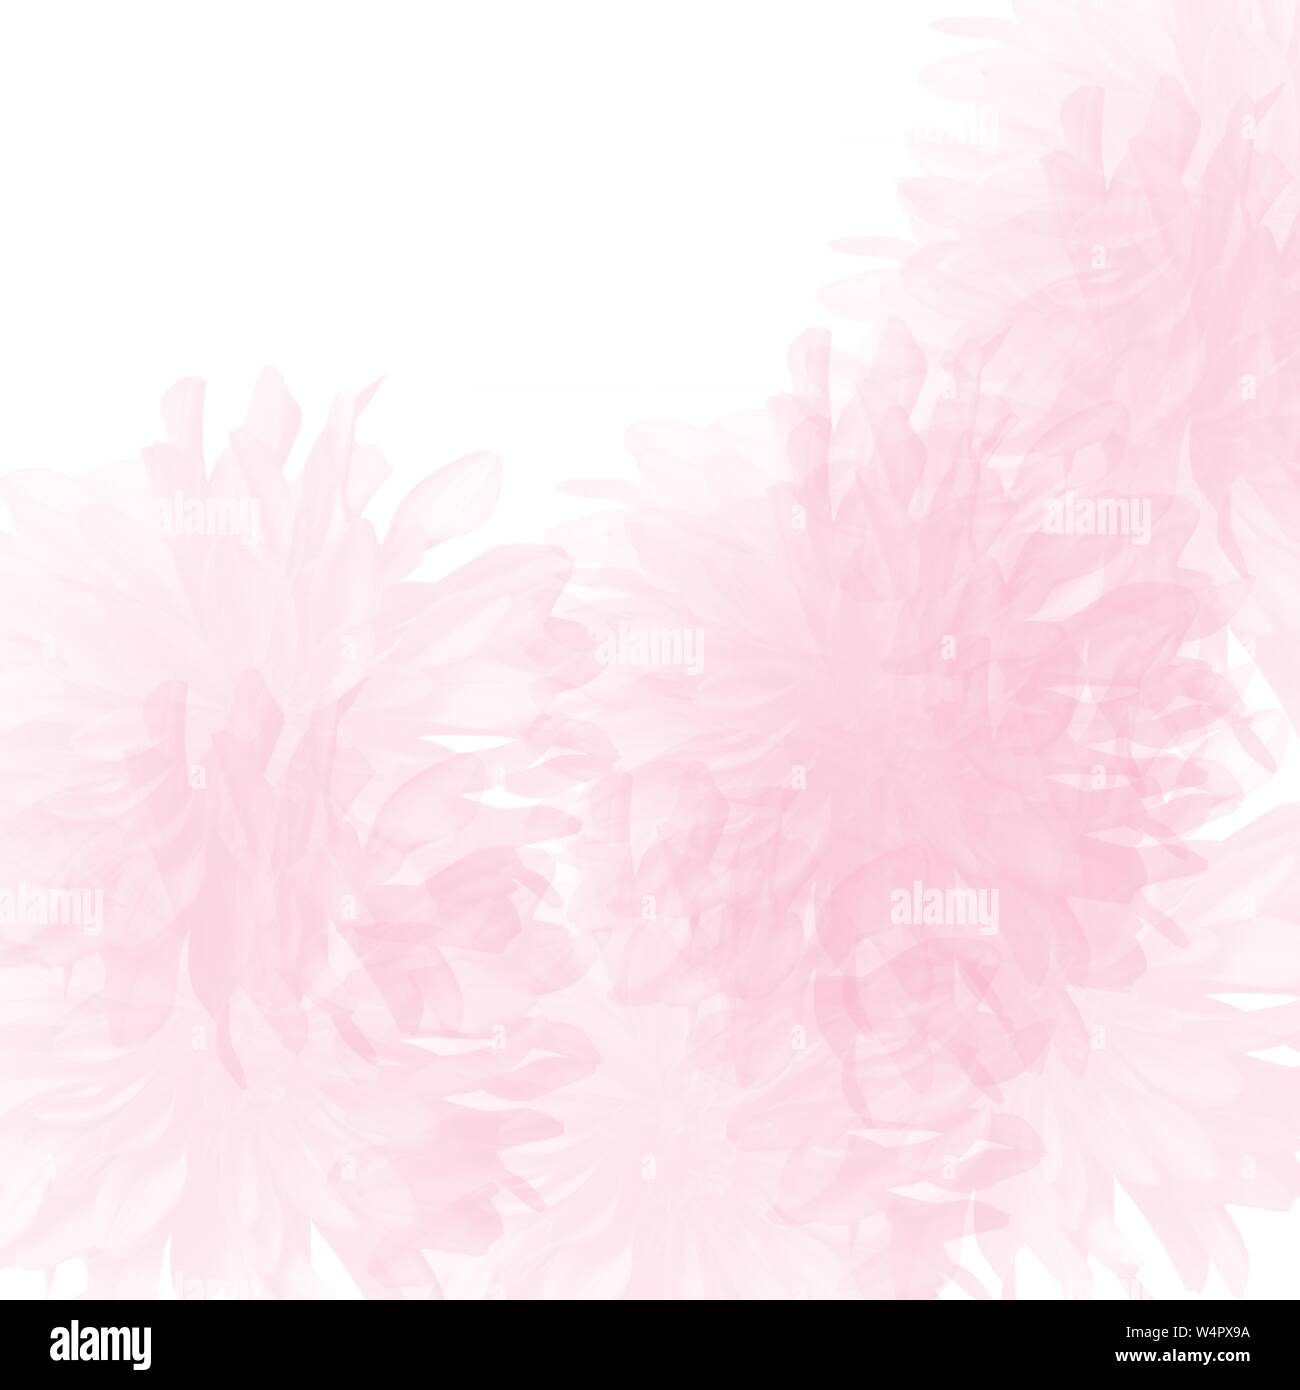 light pink hand drawn watercolor transparent dahlia petals background pattern with white upper corner Stock Photo